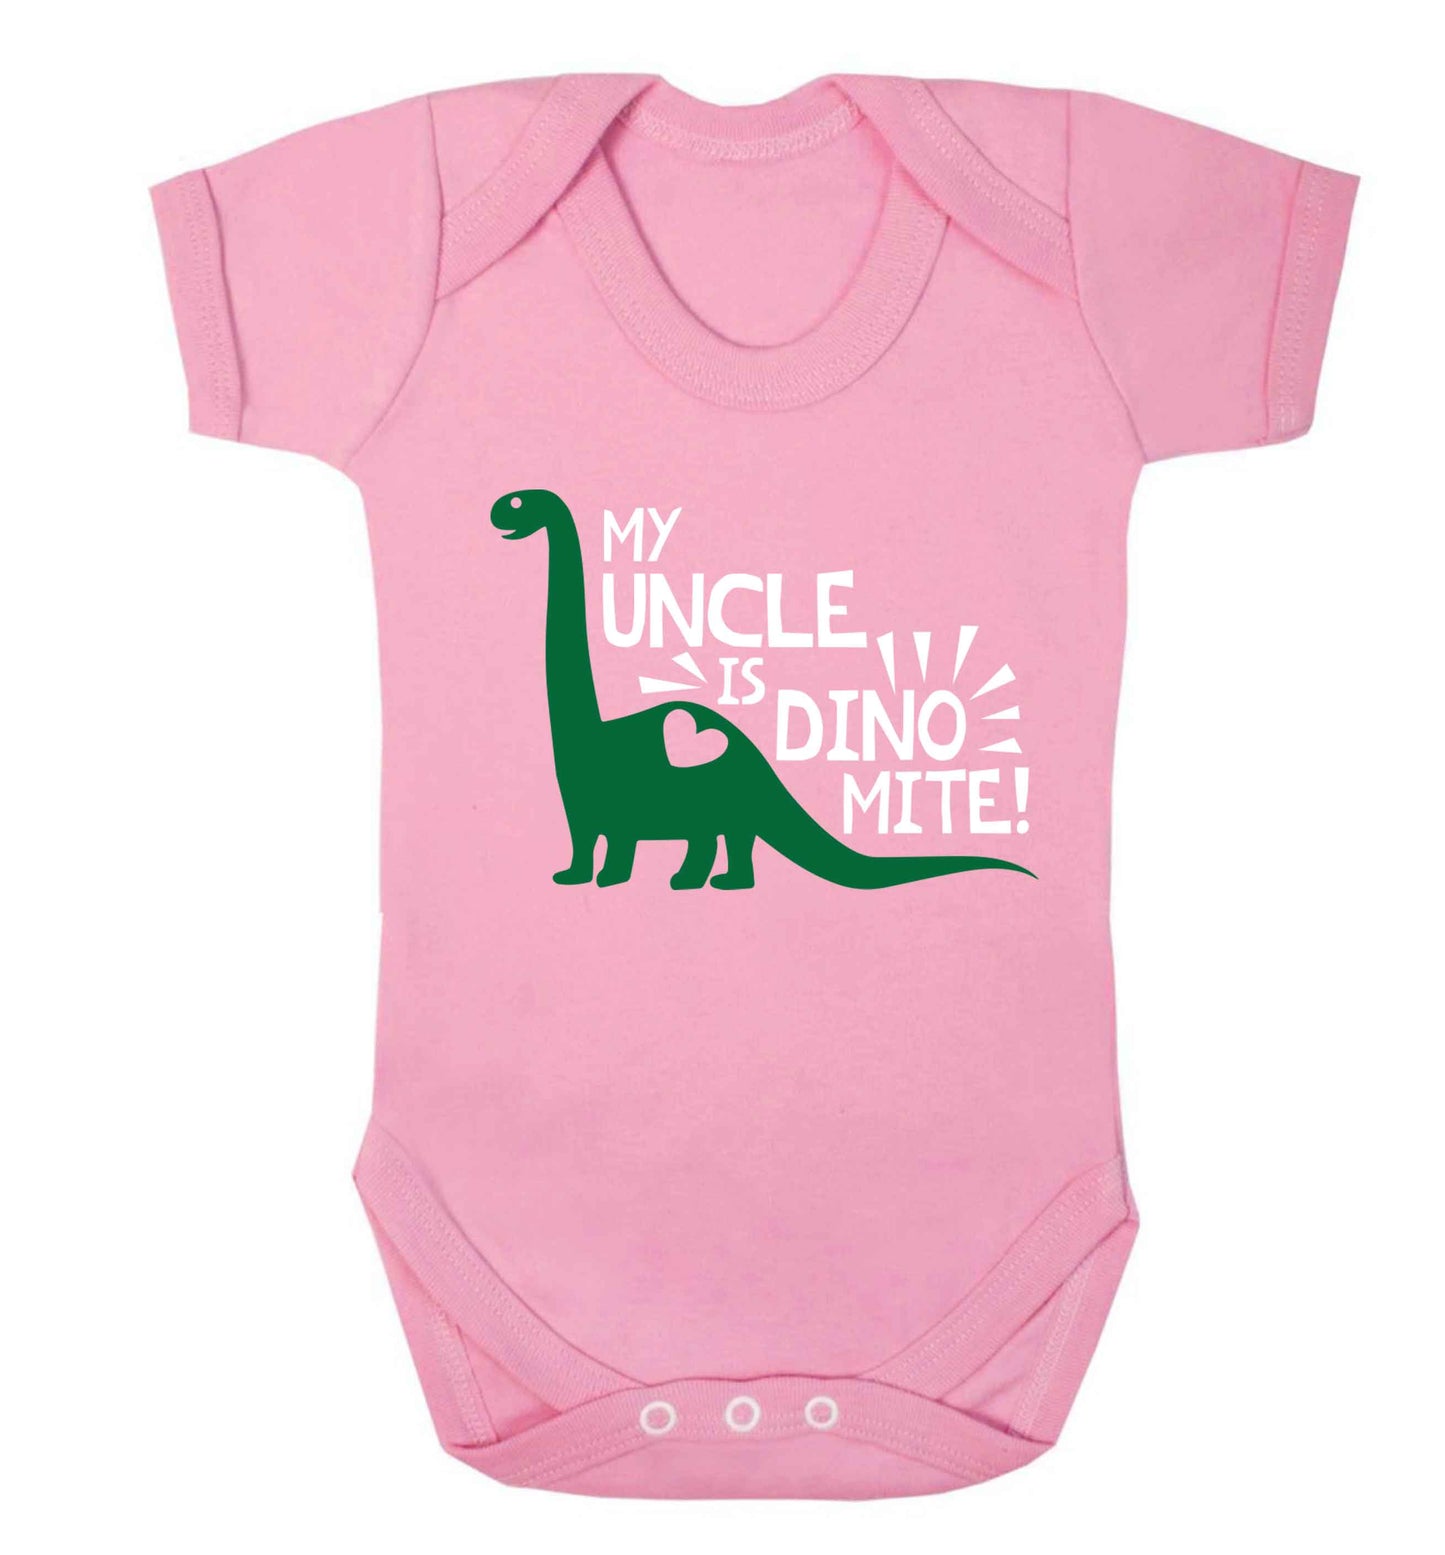 My uncle is dinomite! Baby Vest pale pink 18-24 months